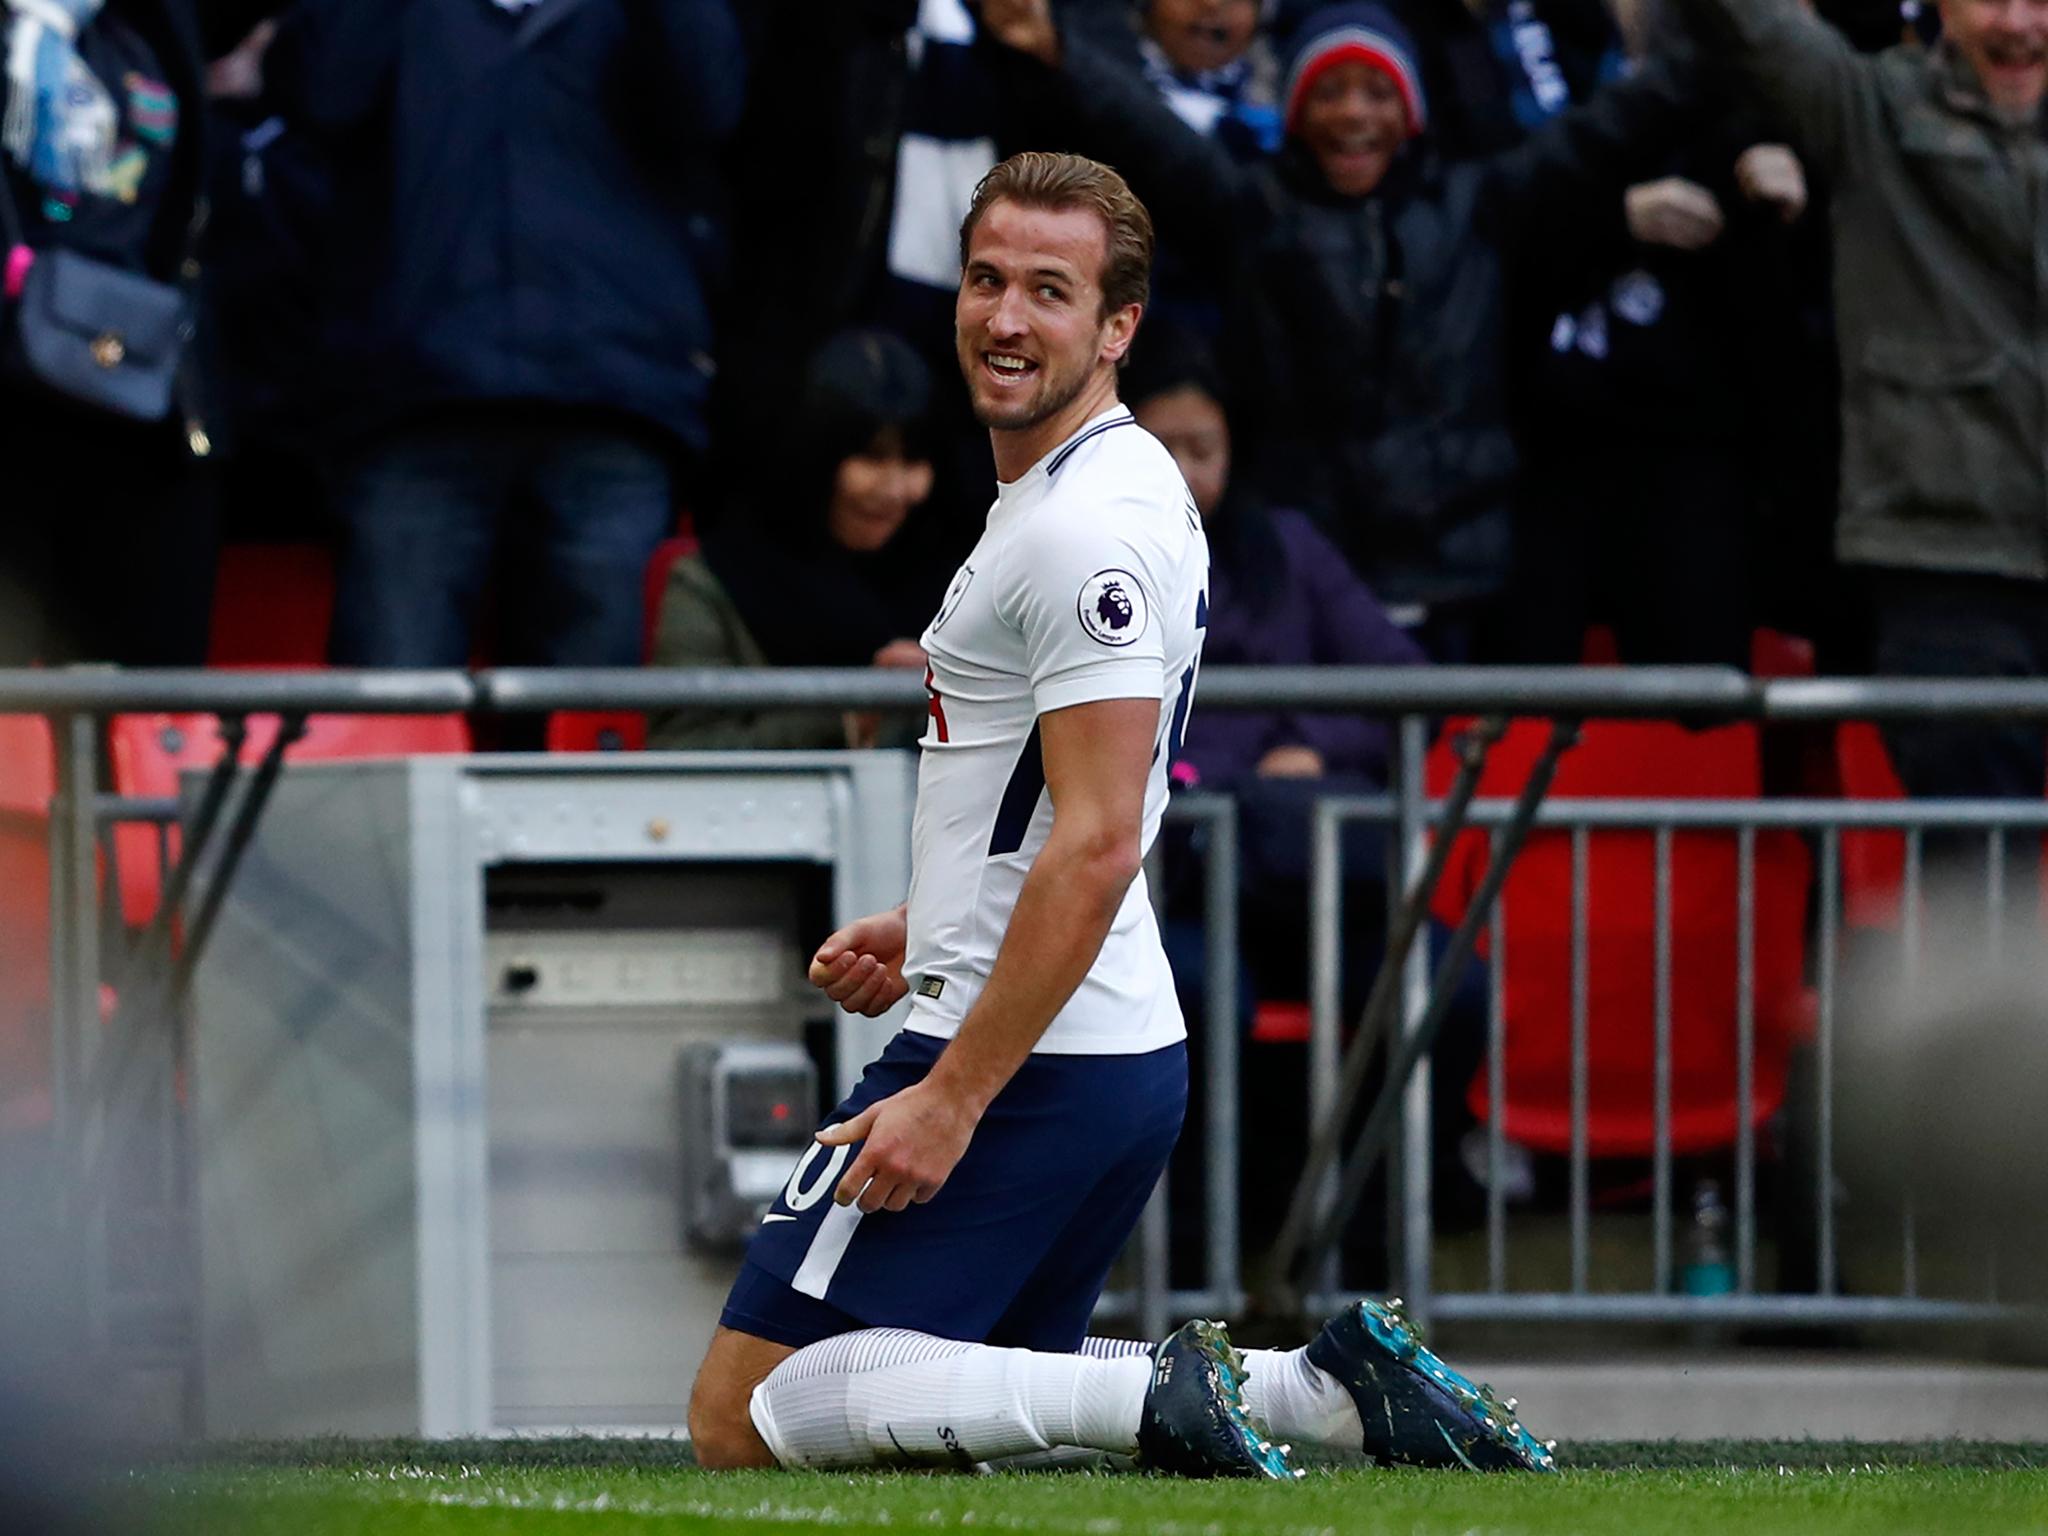 Harry Kane celebrates his second goal for Tottenham against Southampton to become Europe's top goalscorer in 2017